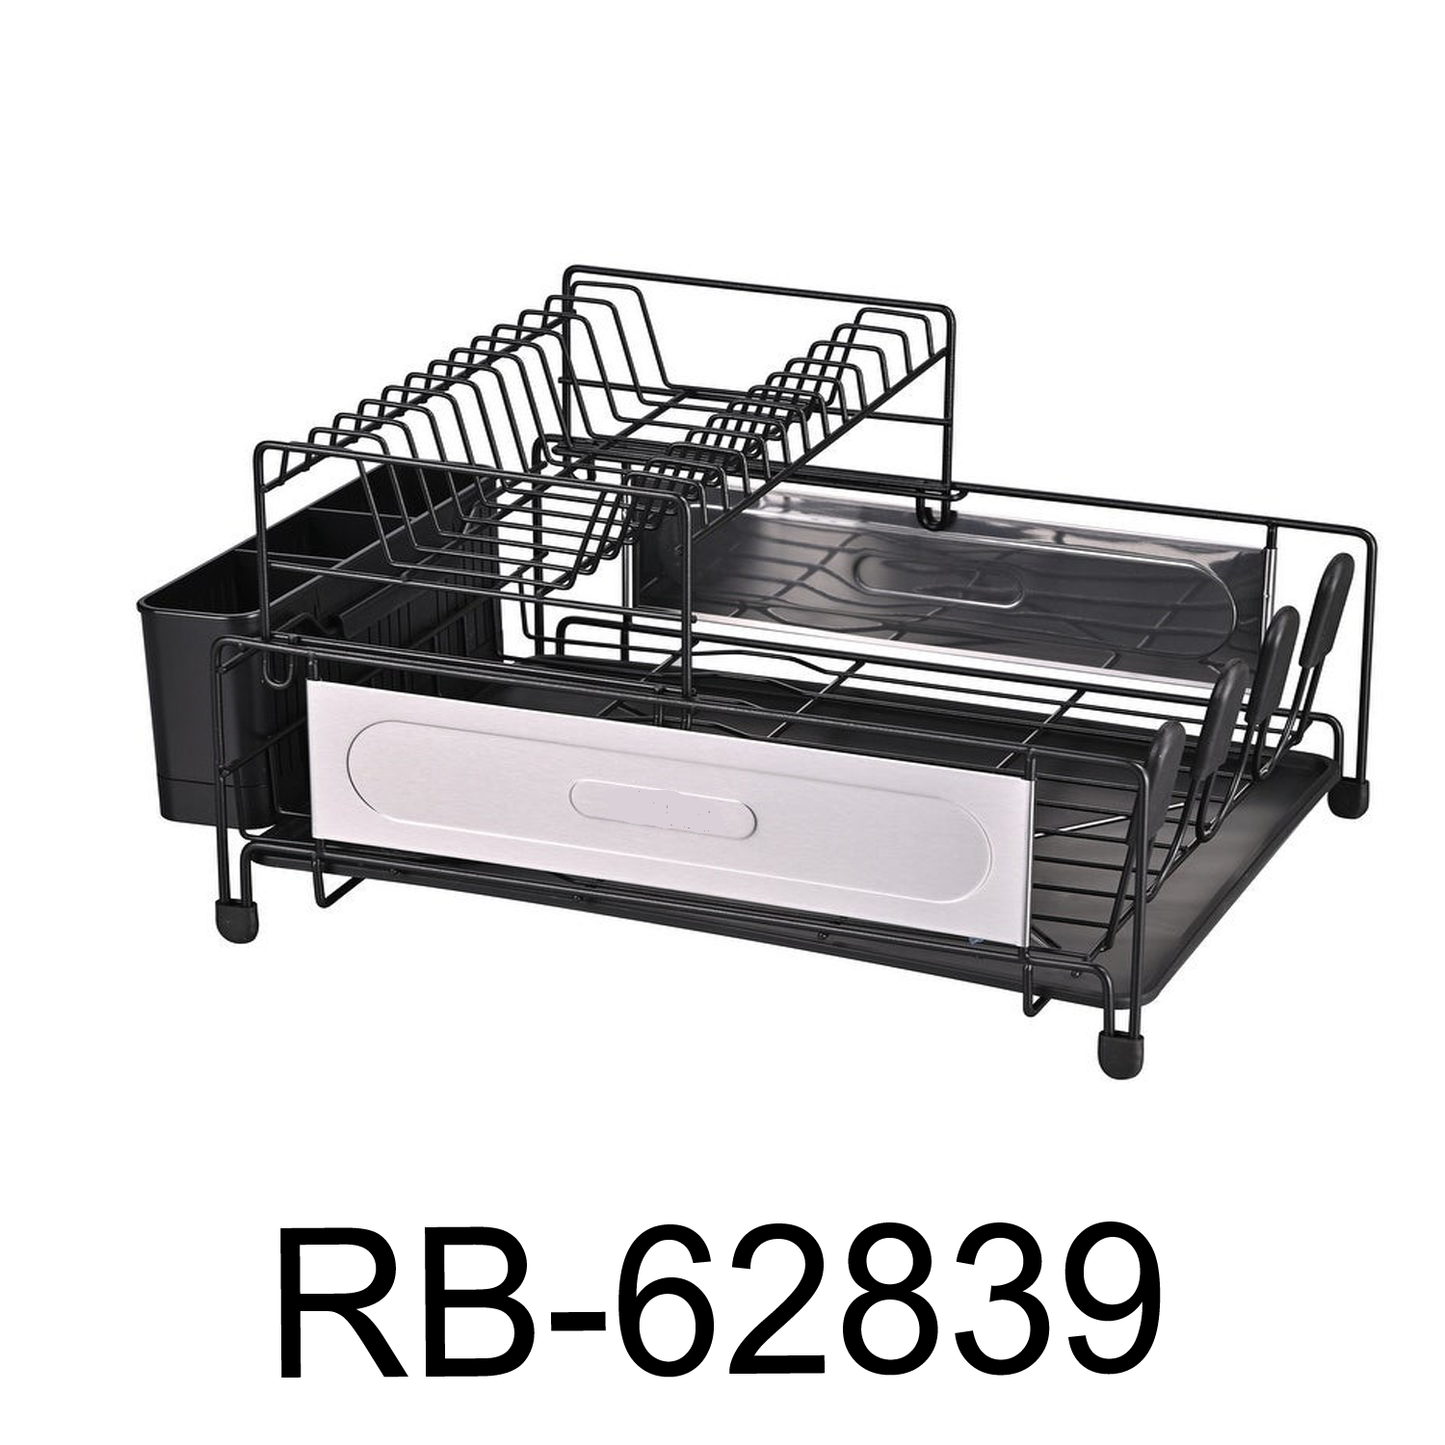 2 Tier Stainless Steel and Self-Draining Rack